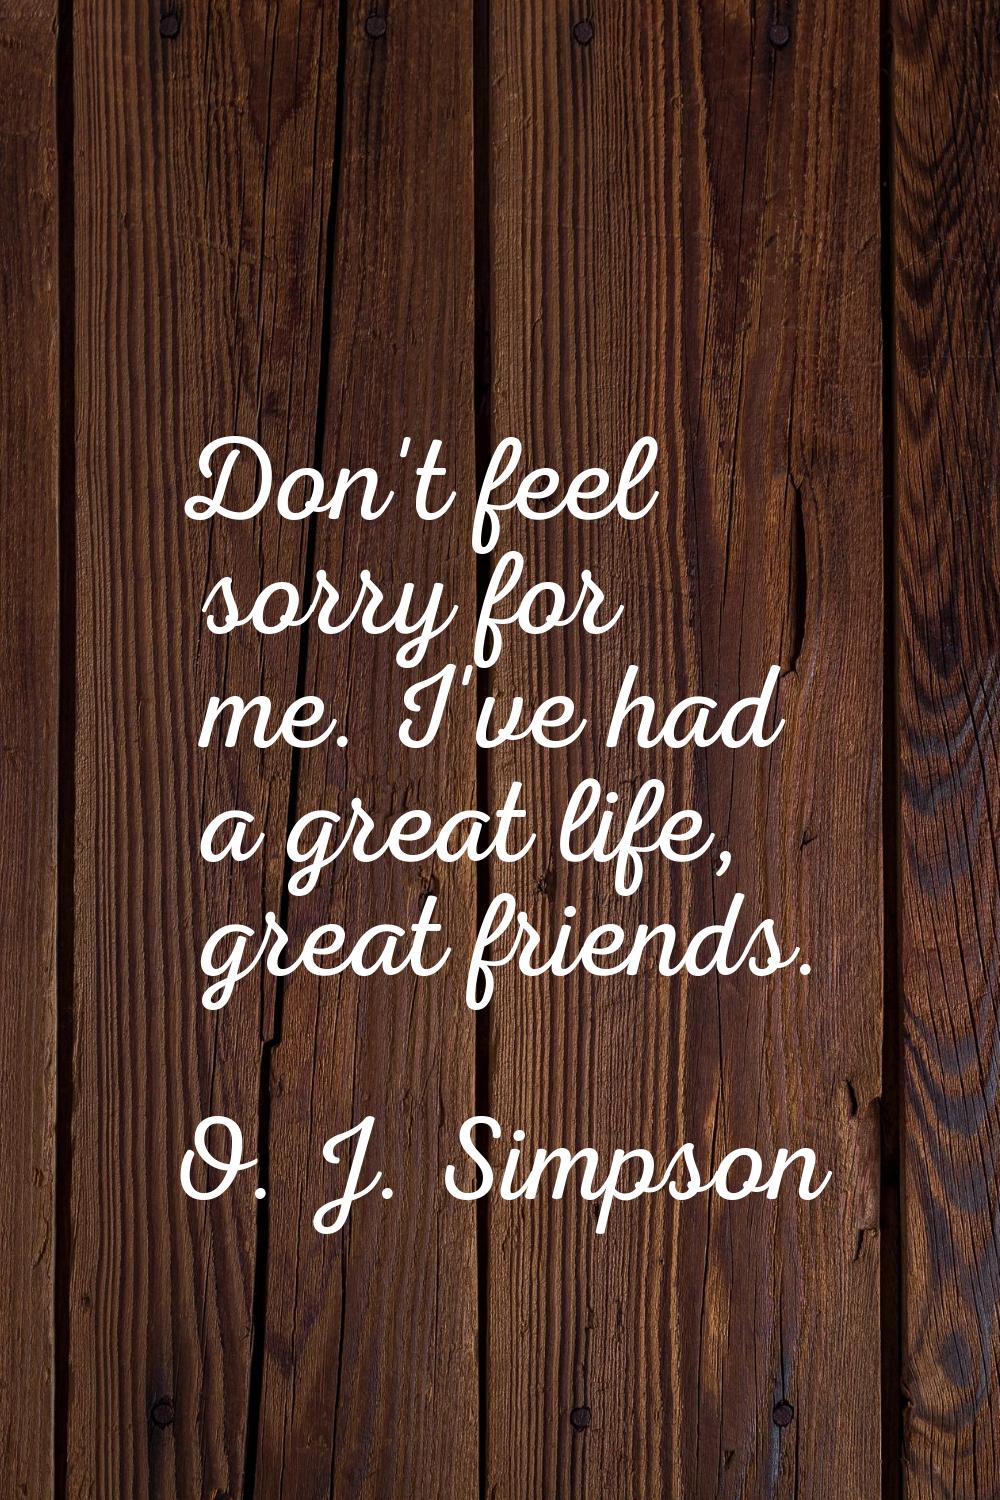 Don't feel sorry for me. I've had a great life, great friends.